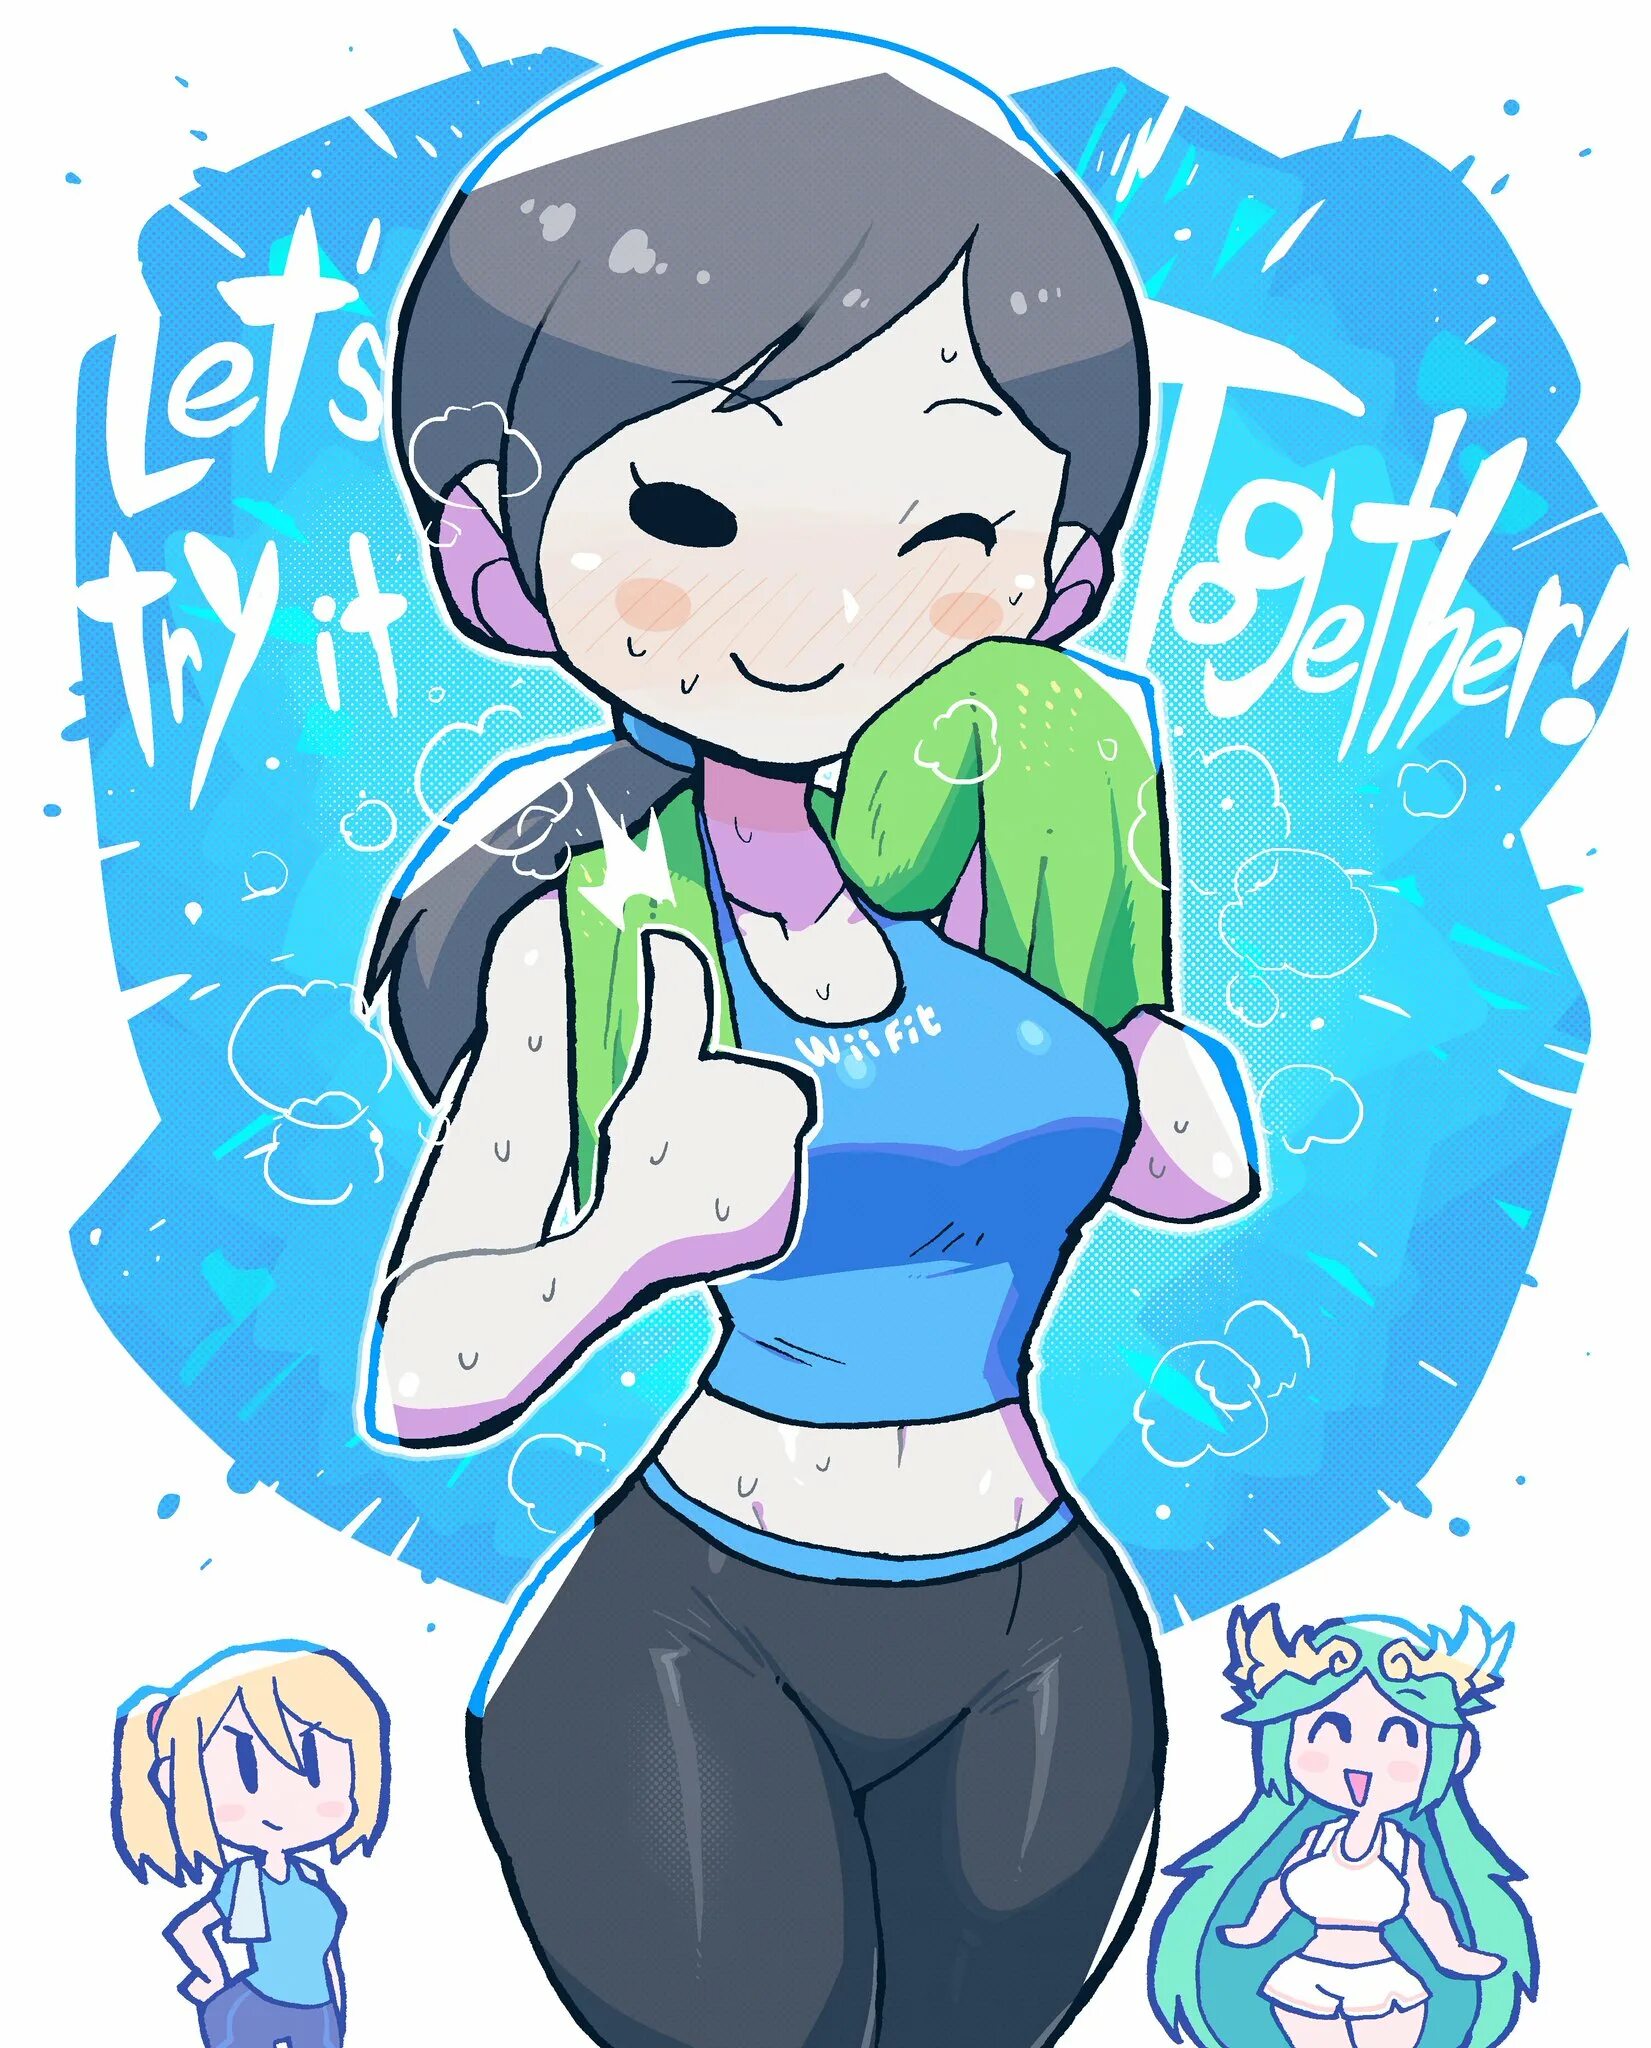 Wii fit. Wii Fit Trainer 34. Тренер Wii Fit Art. Wii Fit futa. Wii Fit Trainer и Самус.